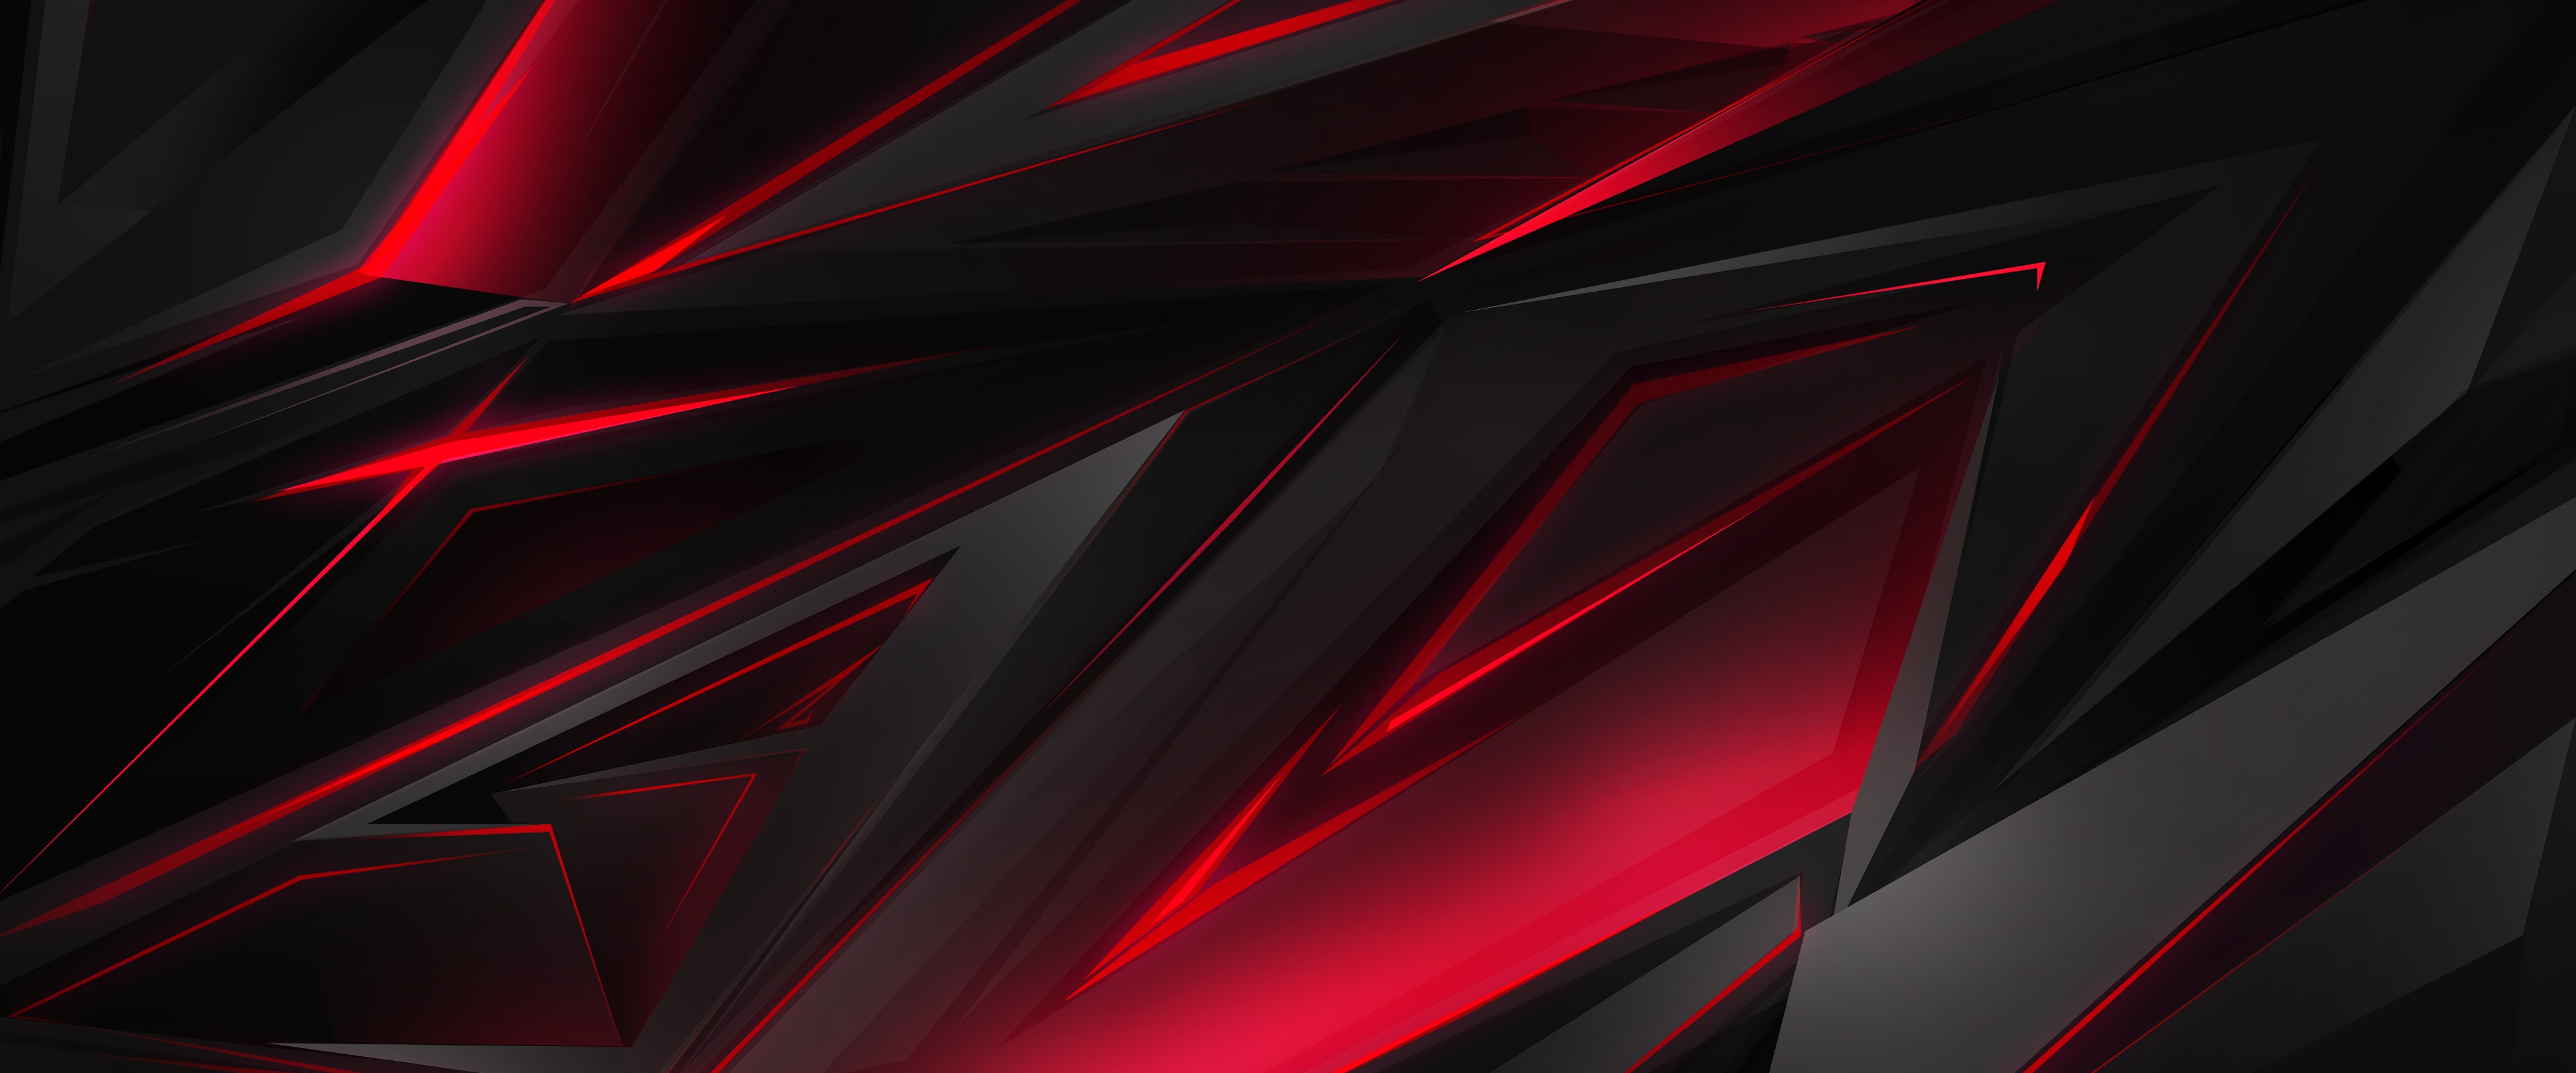 Black Red Abstract Polygon 3d 4k Gaming Wallpaper